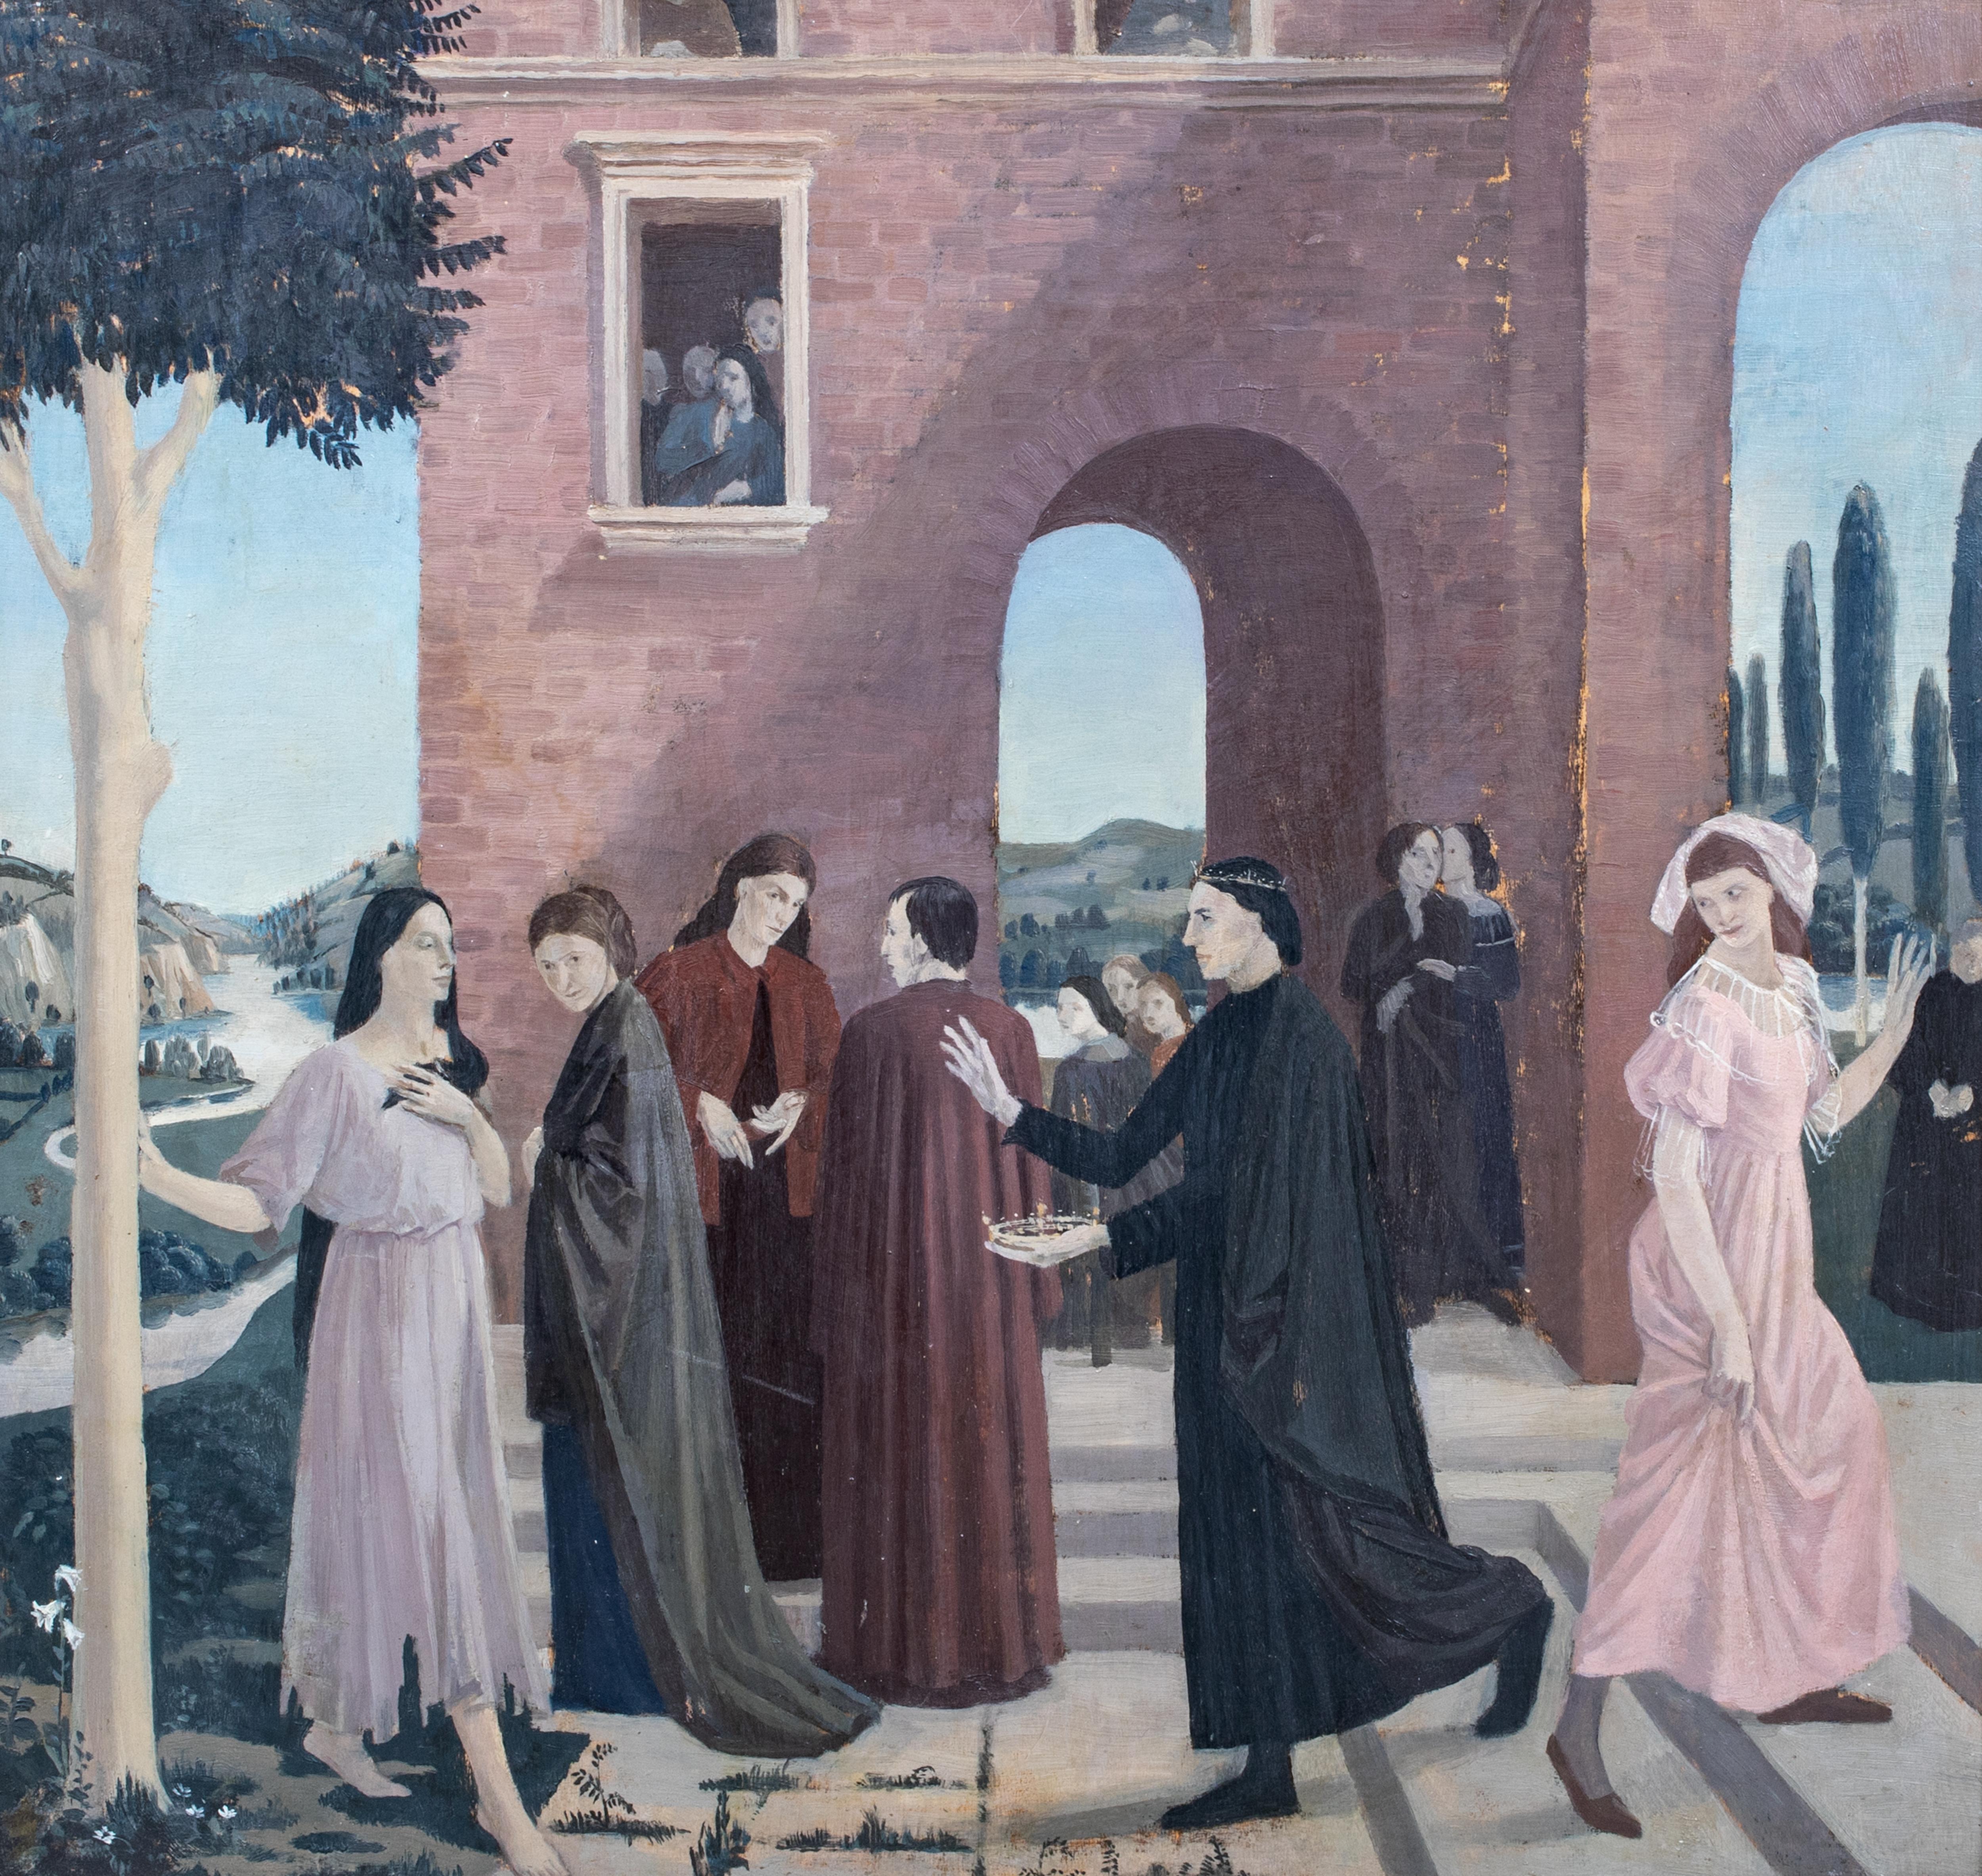 The King & The Beggar Maid, early 20th Century 

by MARJORIE MCGILL (BRITISH, 1908-1996)

Large early 20th Century English Arts & Crafts School scene of the King & The Beggar, oil on board. Painted for a commissioned mural decoration taken from